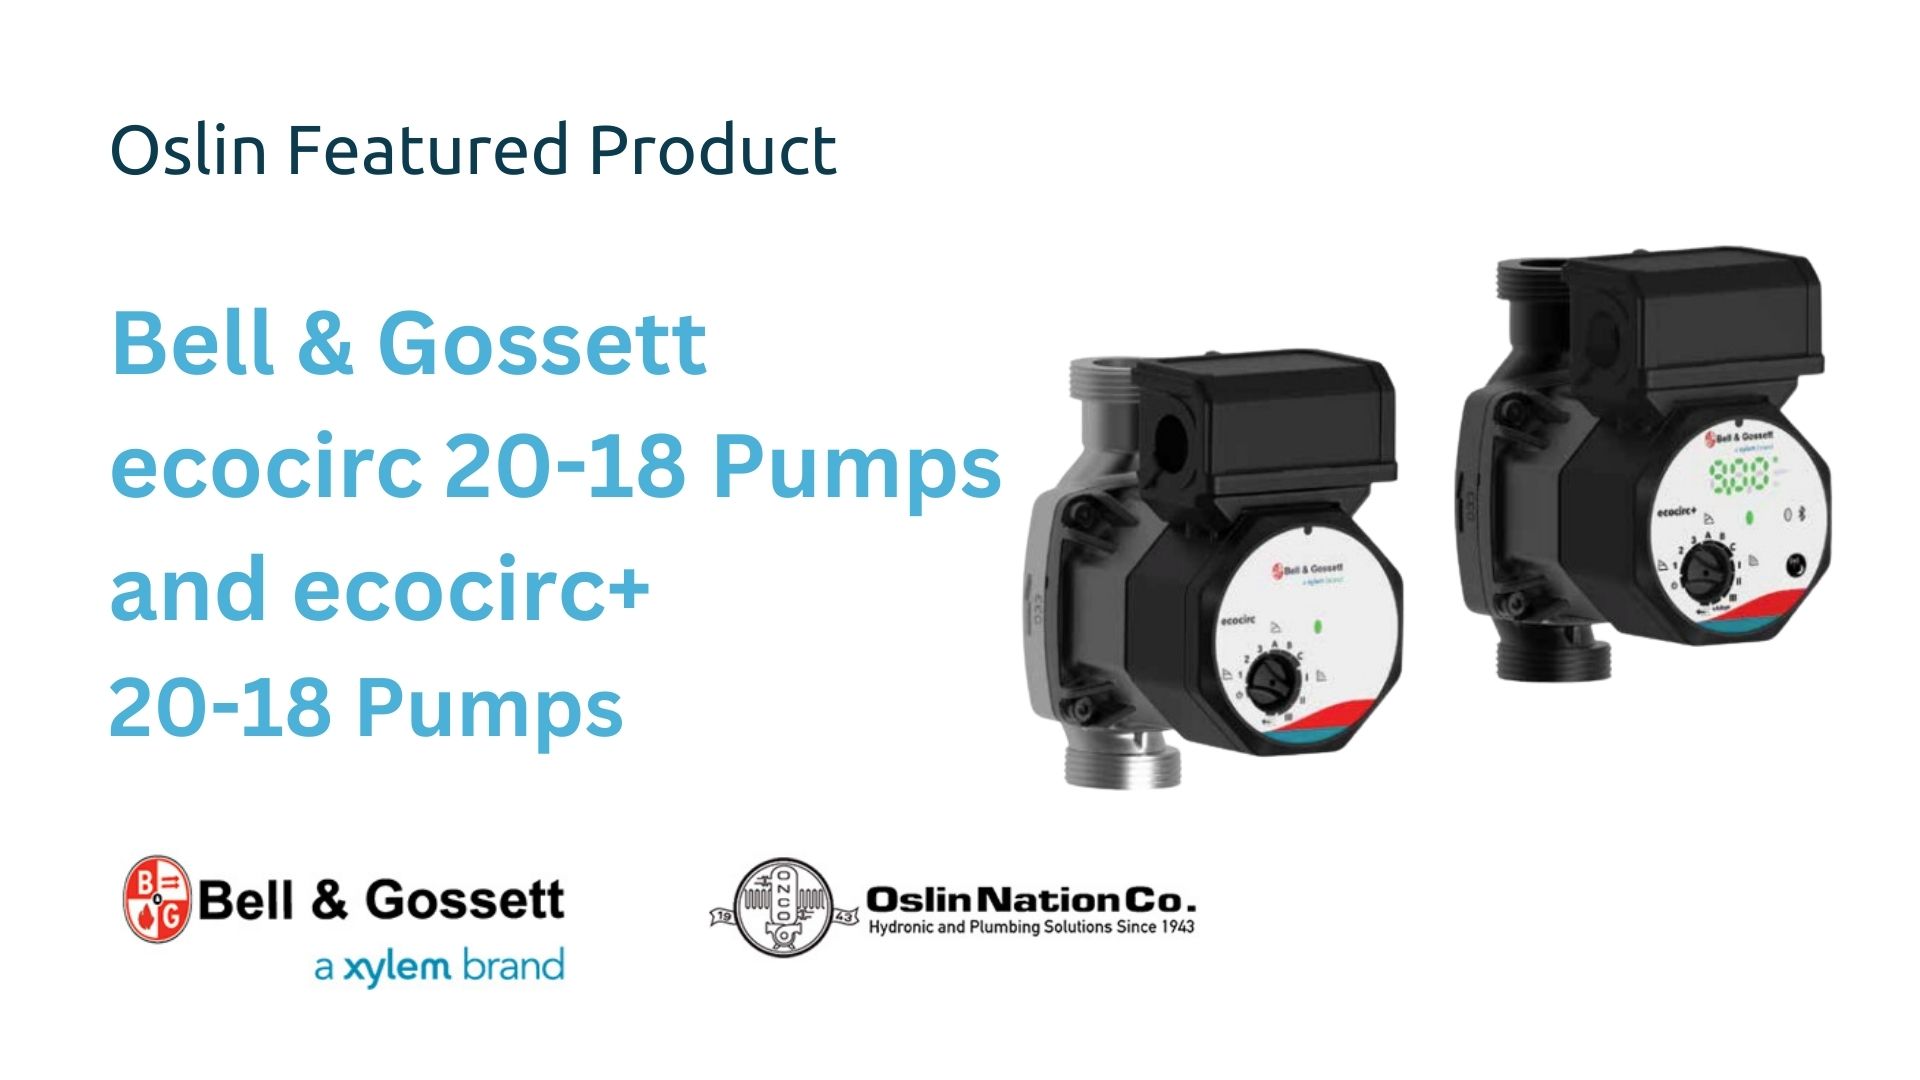 Oslin Featured Product: Bell & Gossett ecocirc 20-18 pumps and ecocirc+ 20-18 pumps, with a photo of the pumps as well as logos for both Bell and Gossett and Oslin Nation.